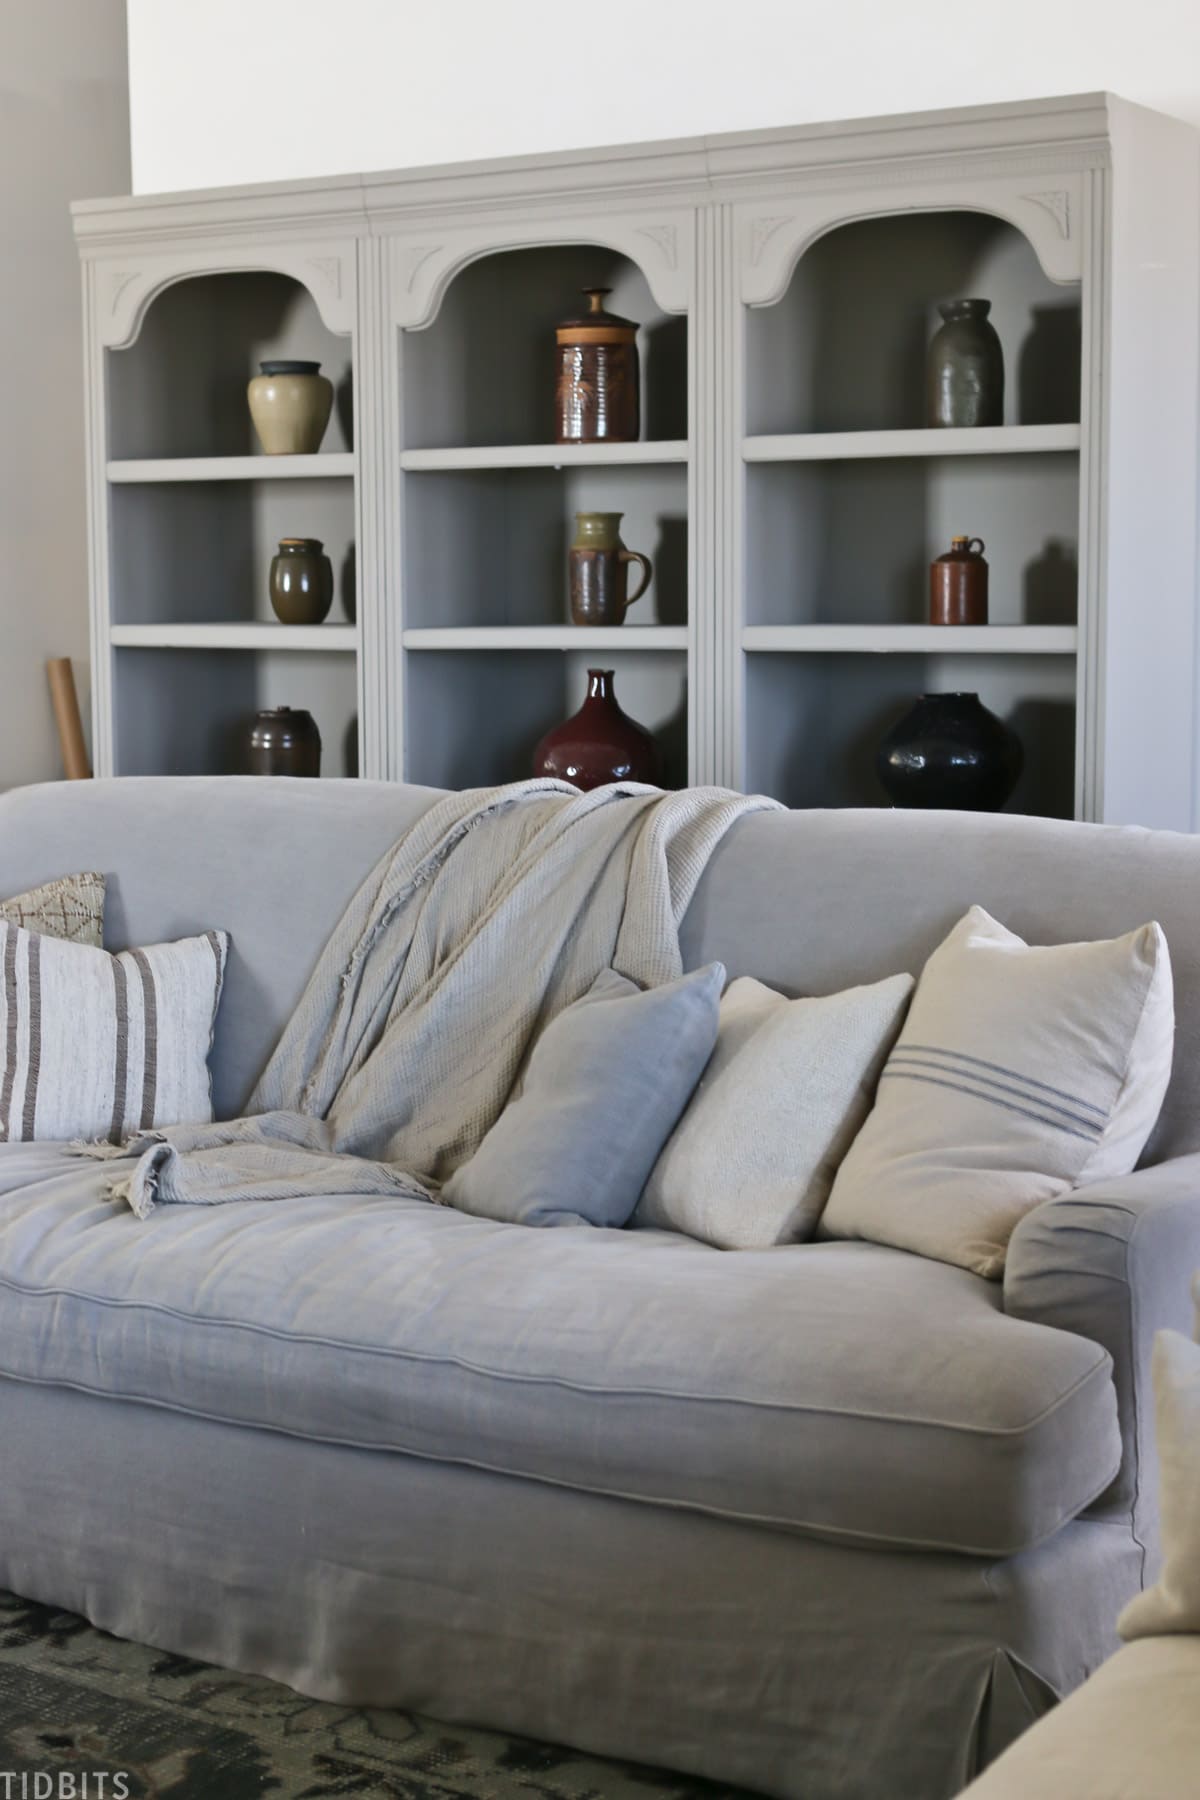 gray couch with decorate pillows and throw blanket with bookshelf in background